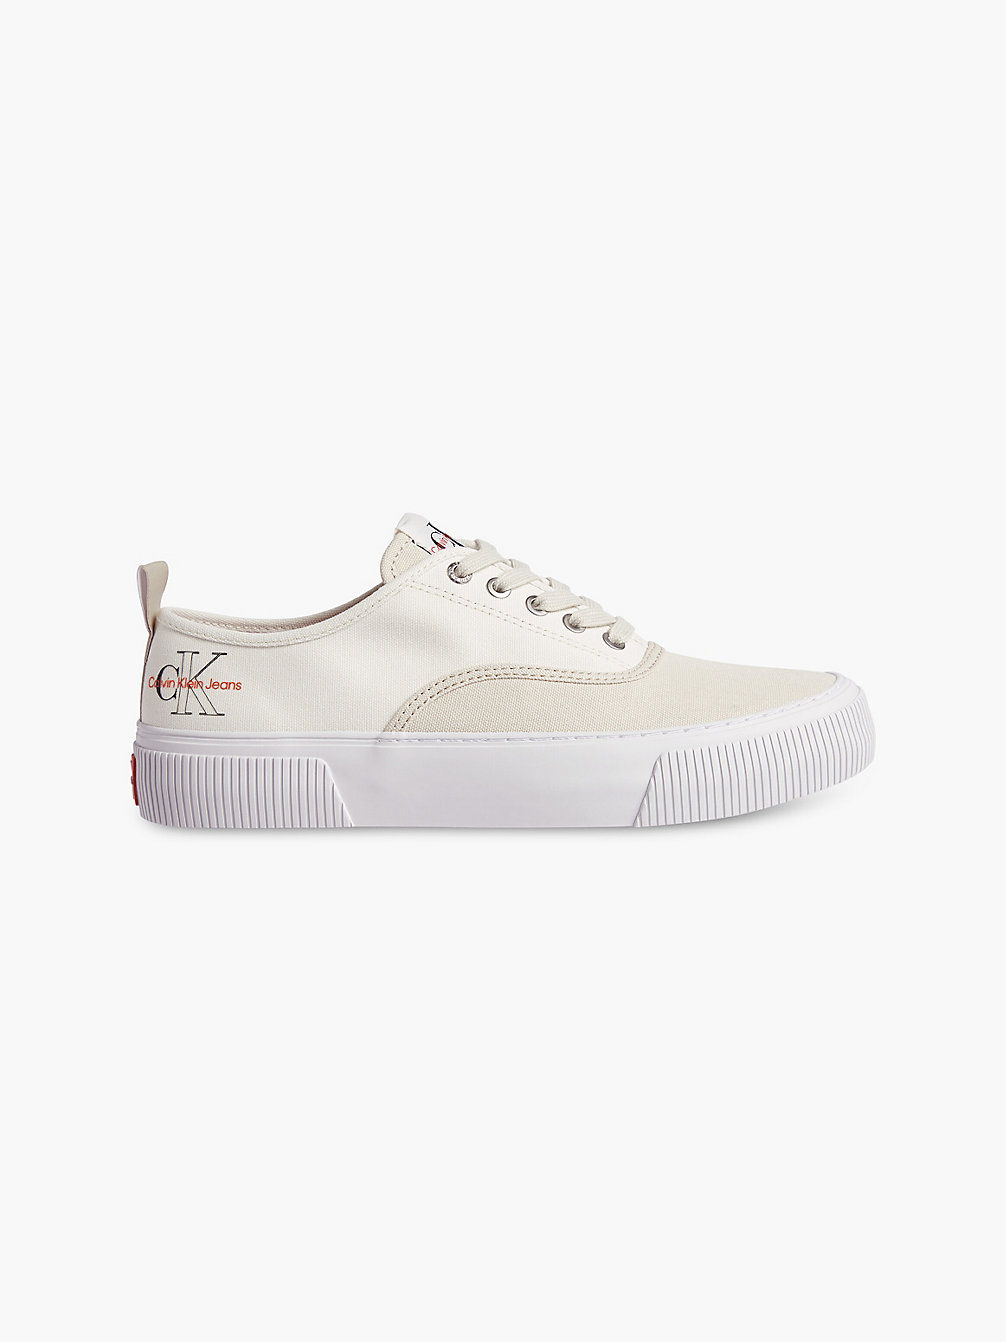 WHITE / EGGSHELL Recycled Canvas Trainers undefined men Calvin Klein